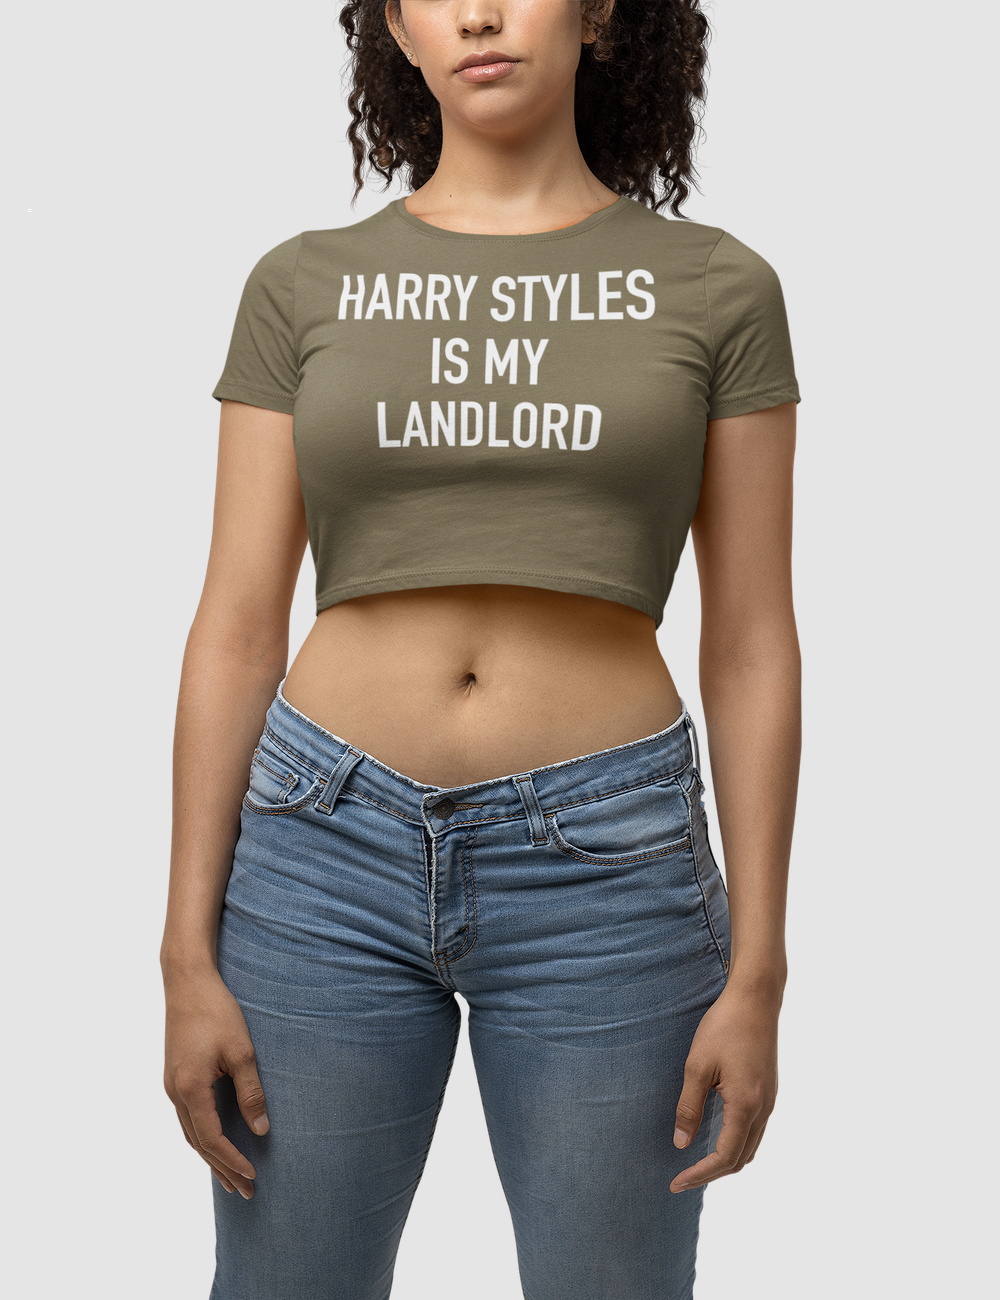 Harry Styles Is My Landlord | Women's Fitted Crop Top T-Shirt OniTakai